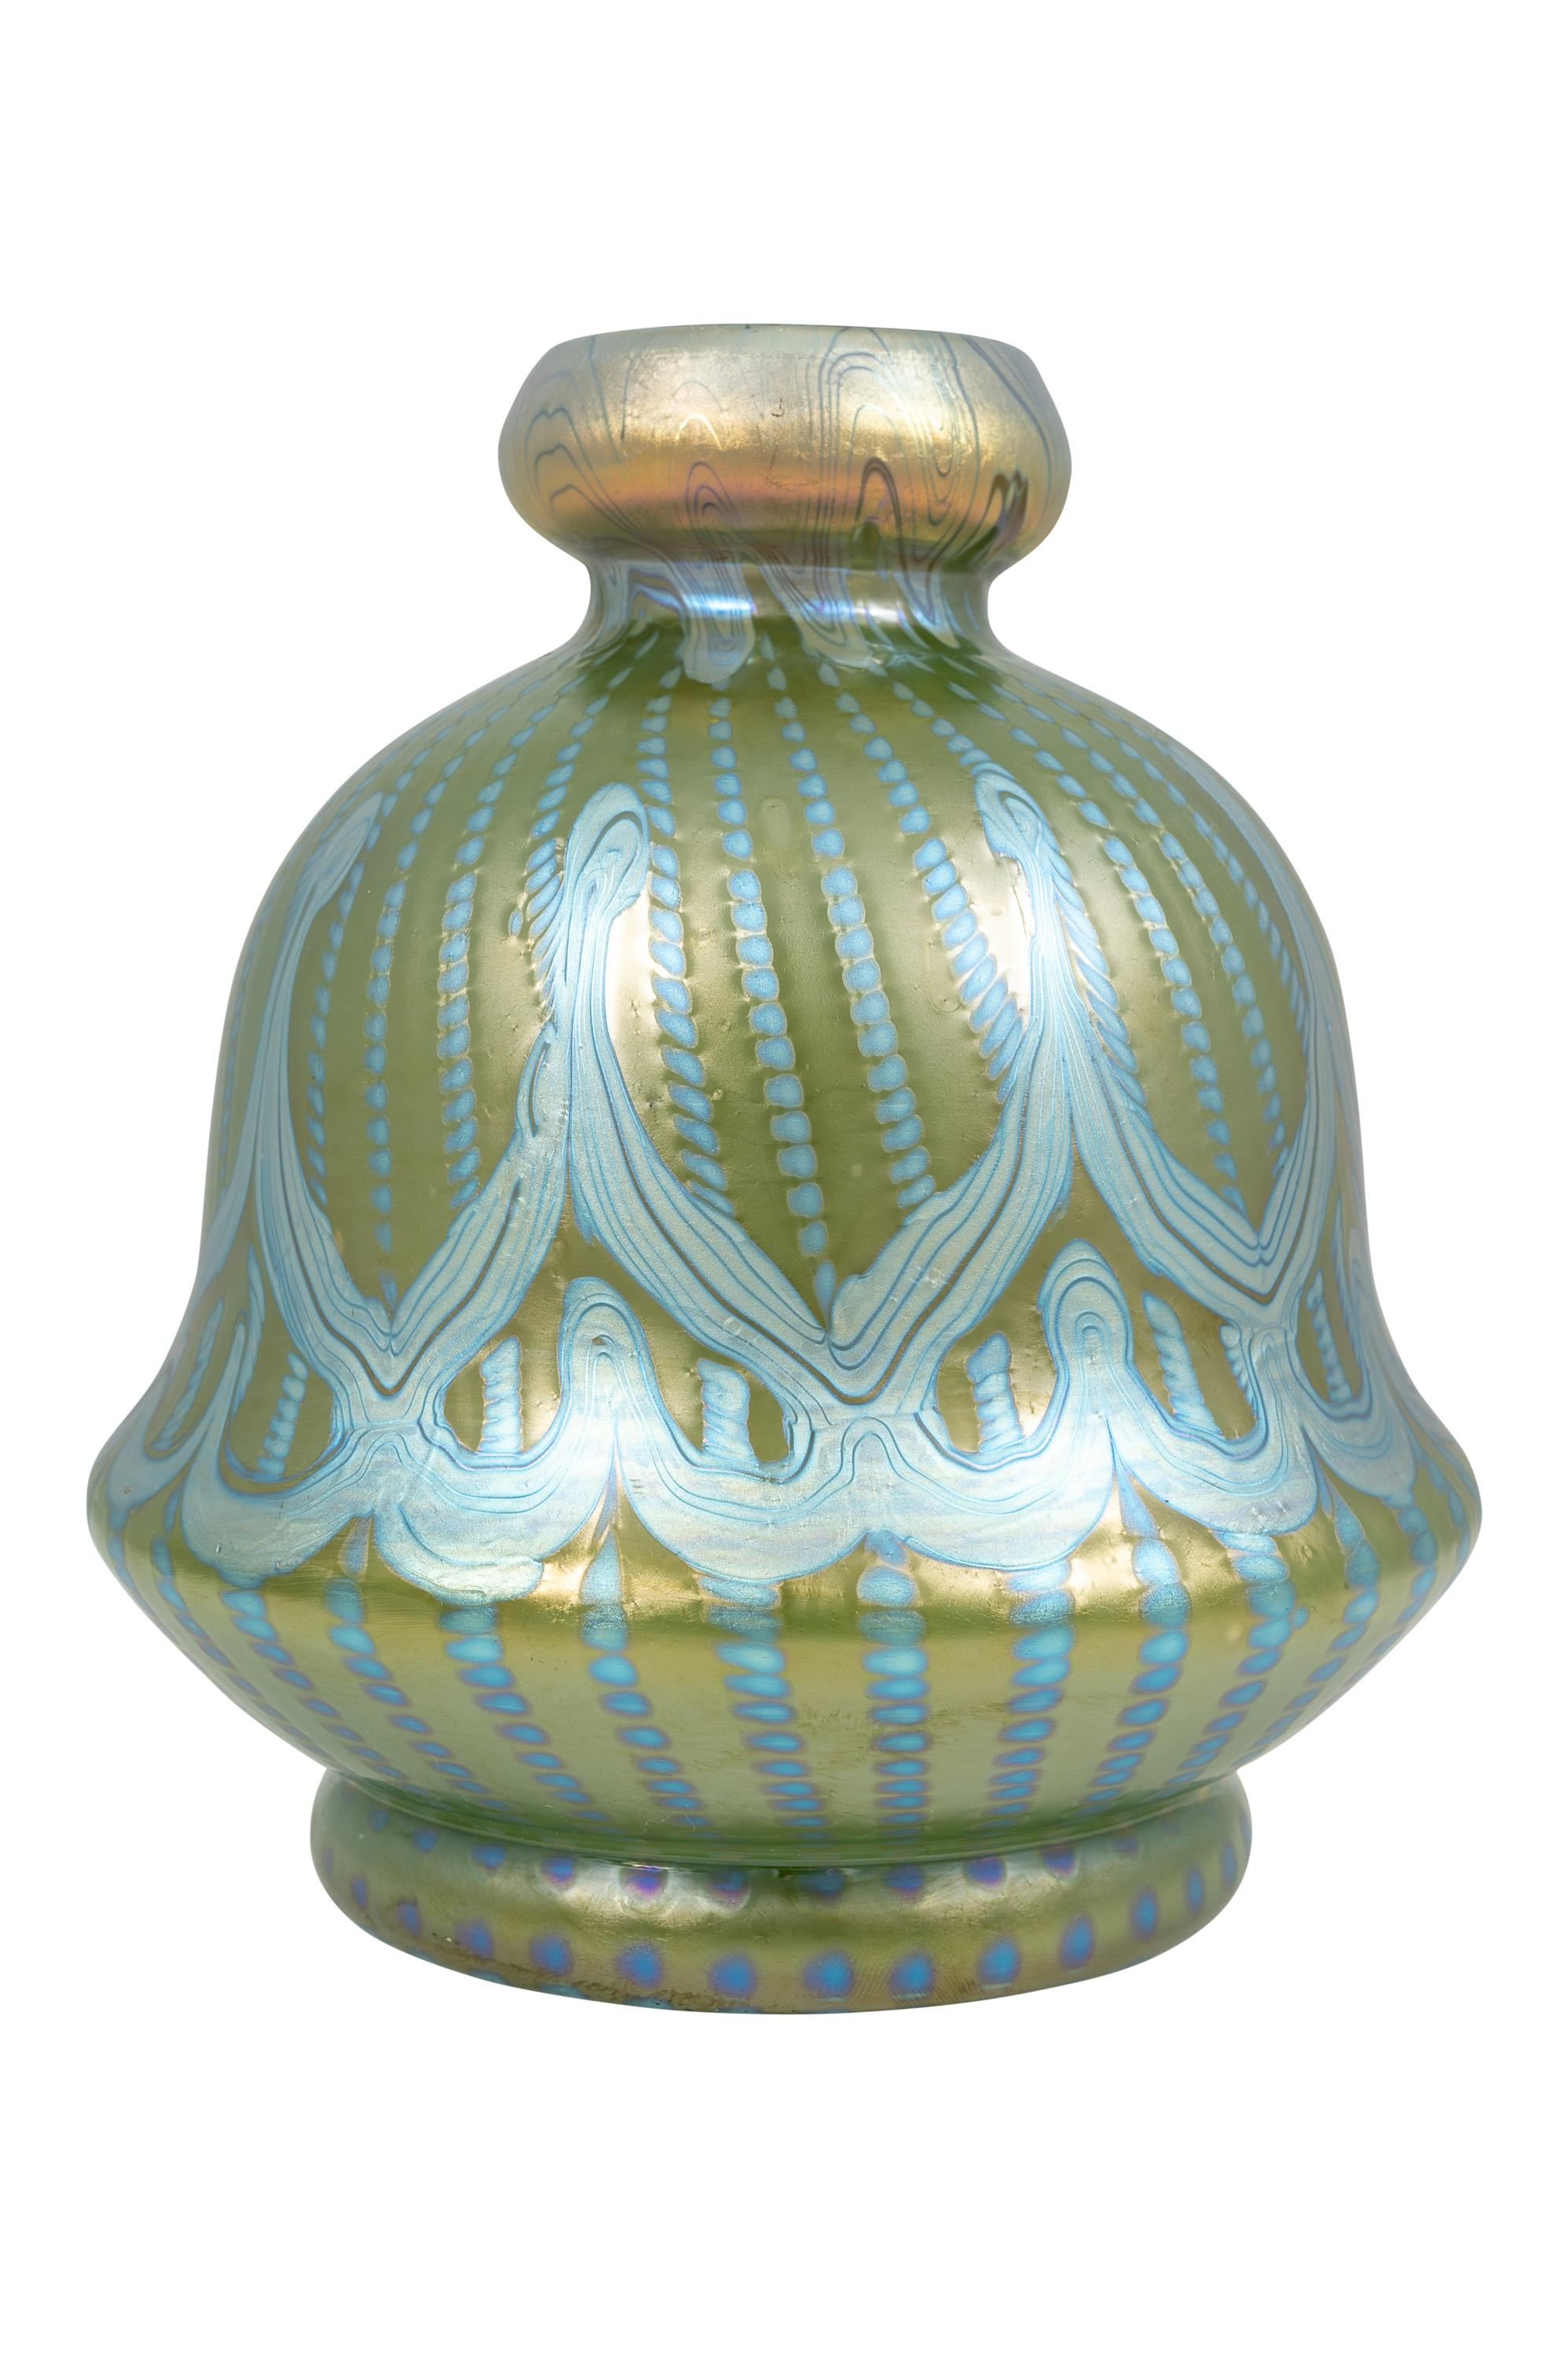 Bohemian glass vase, manufactured by Johann Loetz Witwe, unidentified decoration, ca. 1900, Blue, Silver, Green, Viennese Art Nouveau, Jugendstil, Art Deco, art glass, iridescent glass.

Technique and material: Glass, mould-blown and freeform,